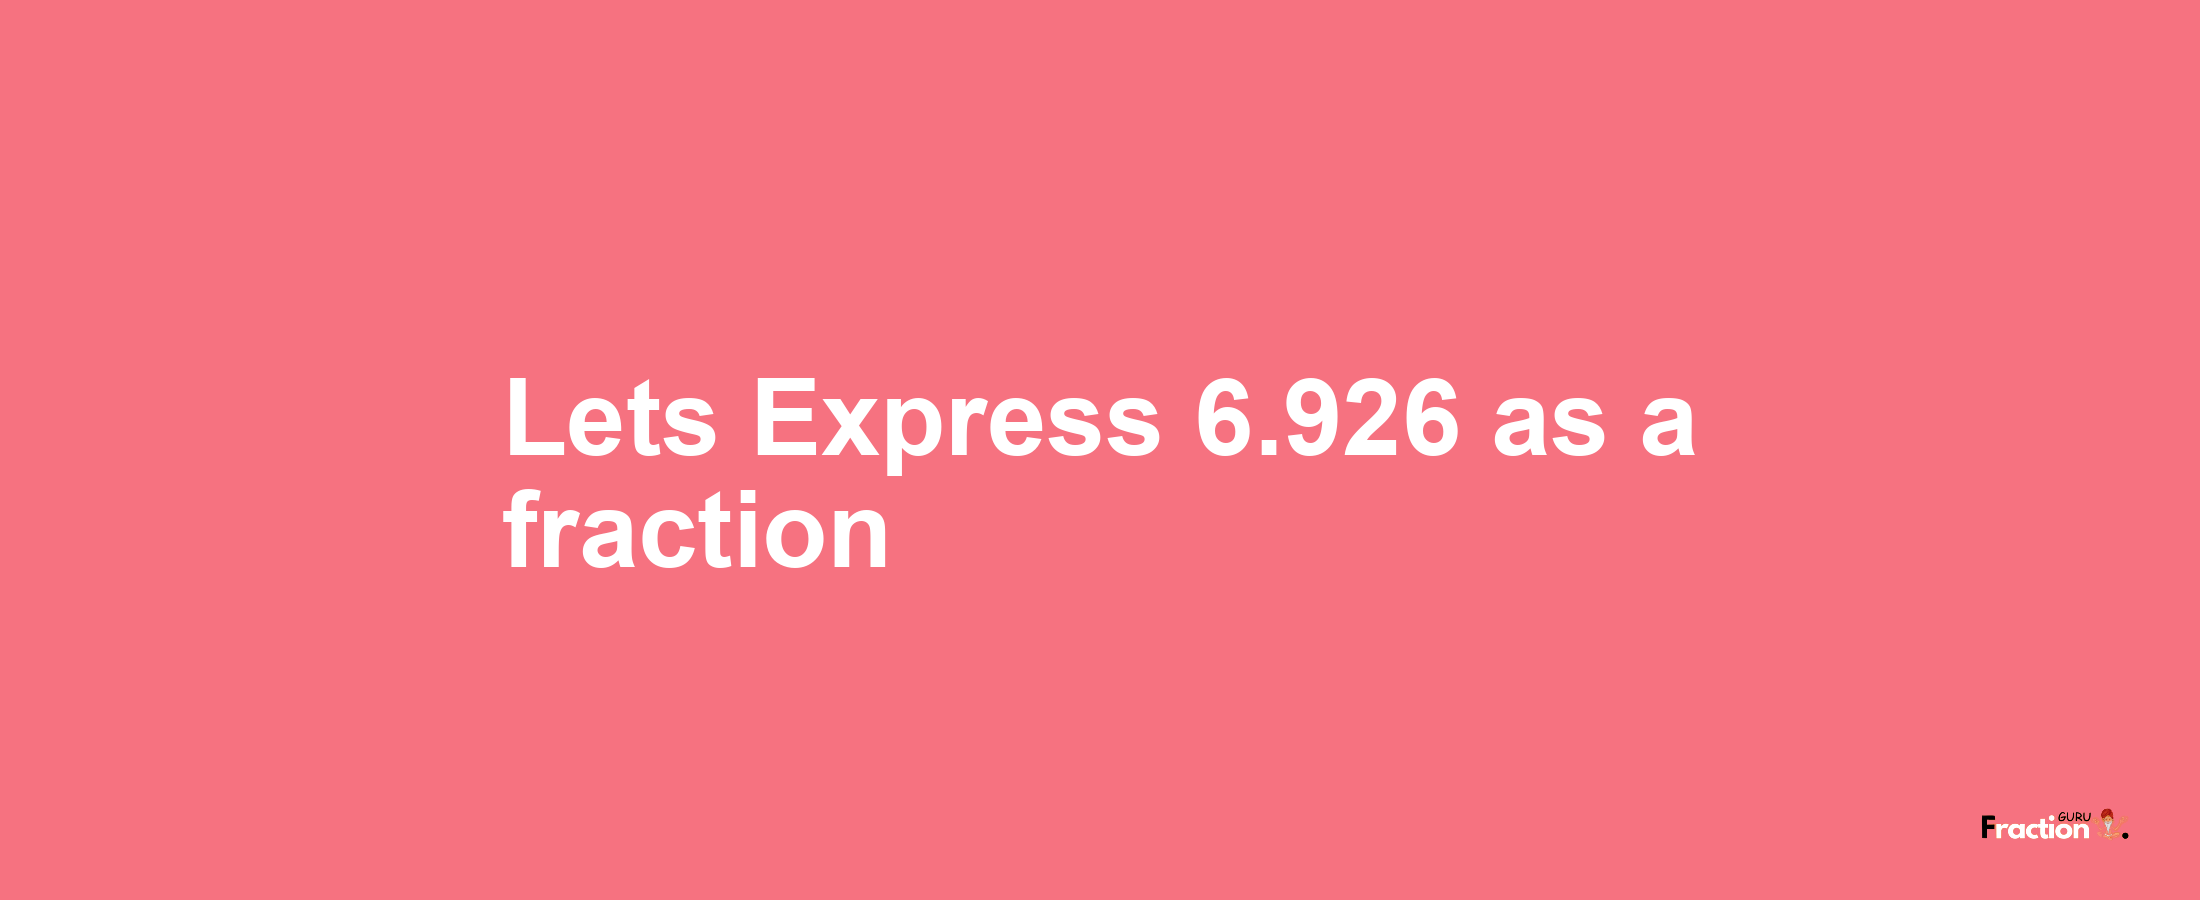 Lets Express 6.926 as afraction